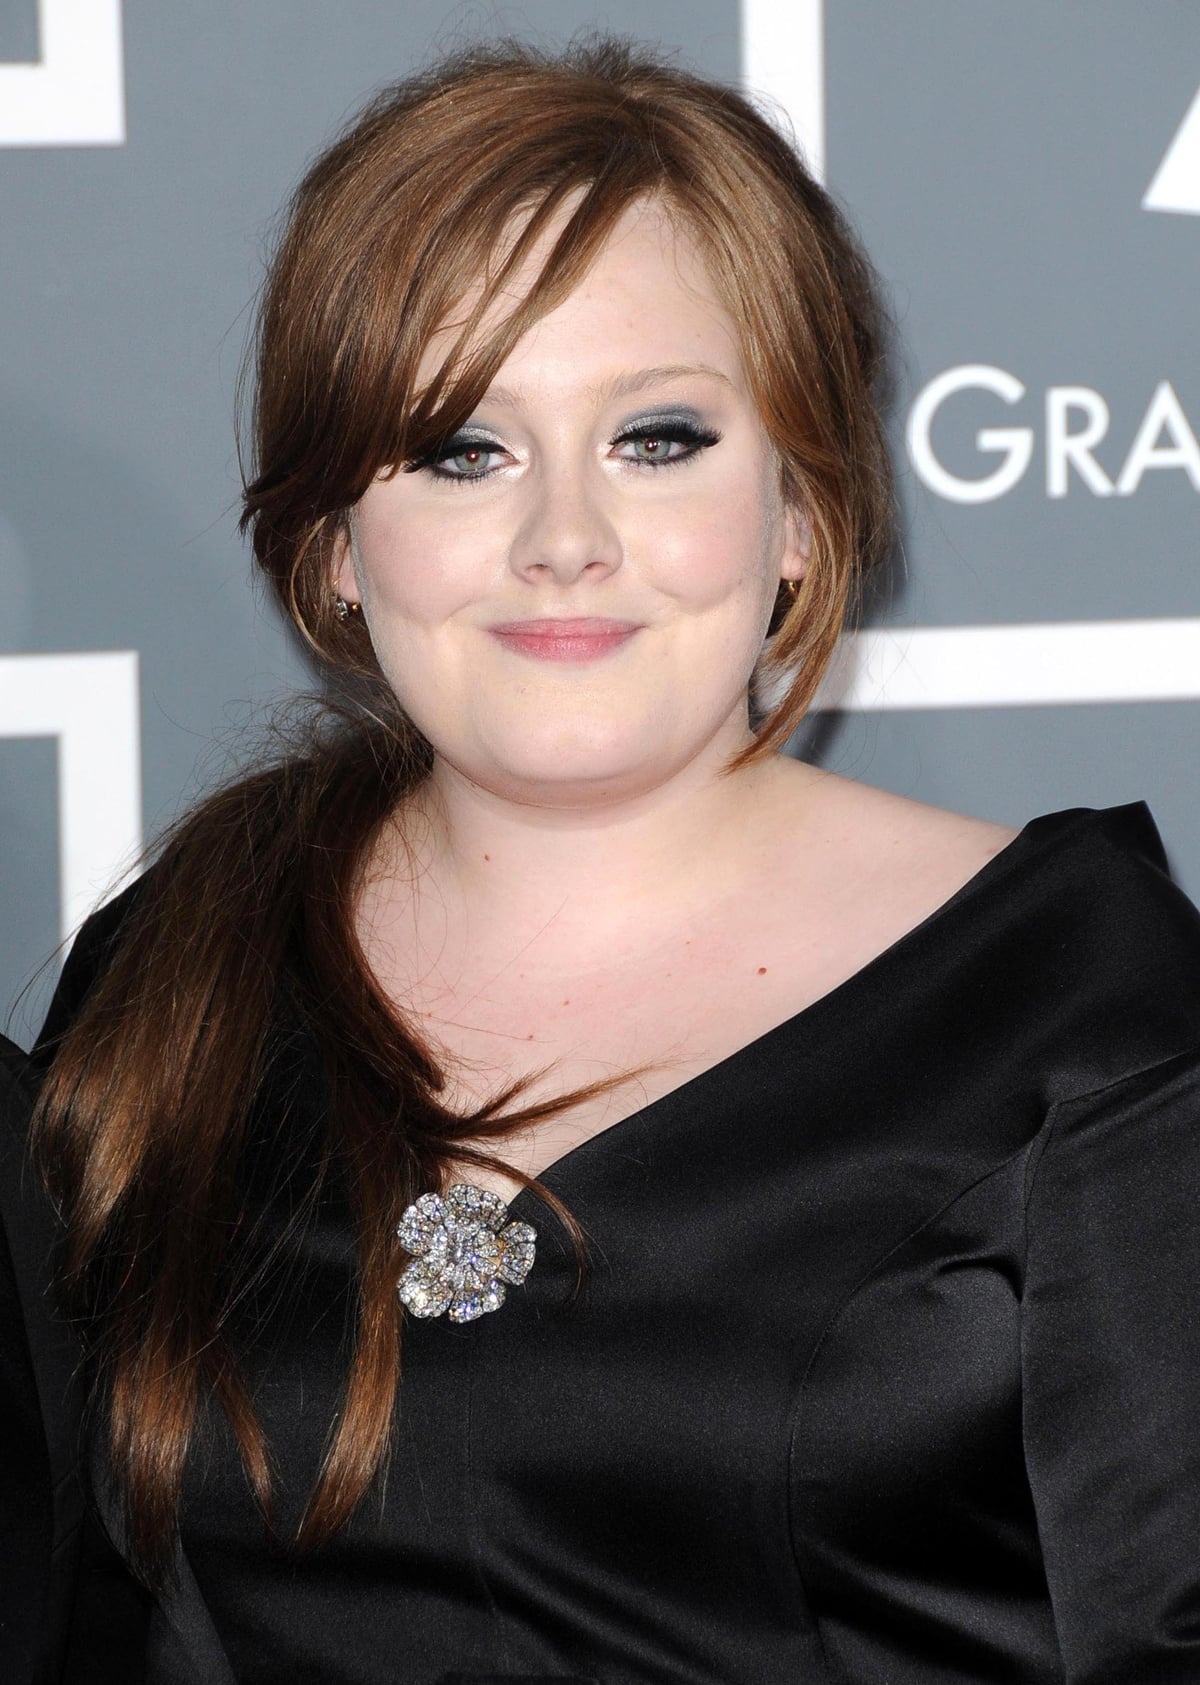 Singer Adele prior to her weight loss at the 51st Annual GRAMMY Awards